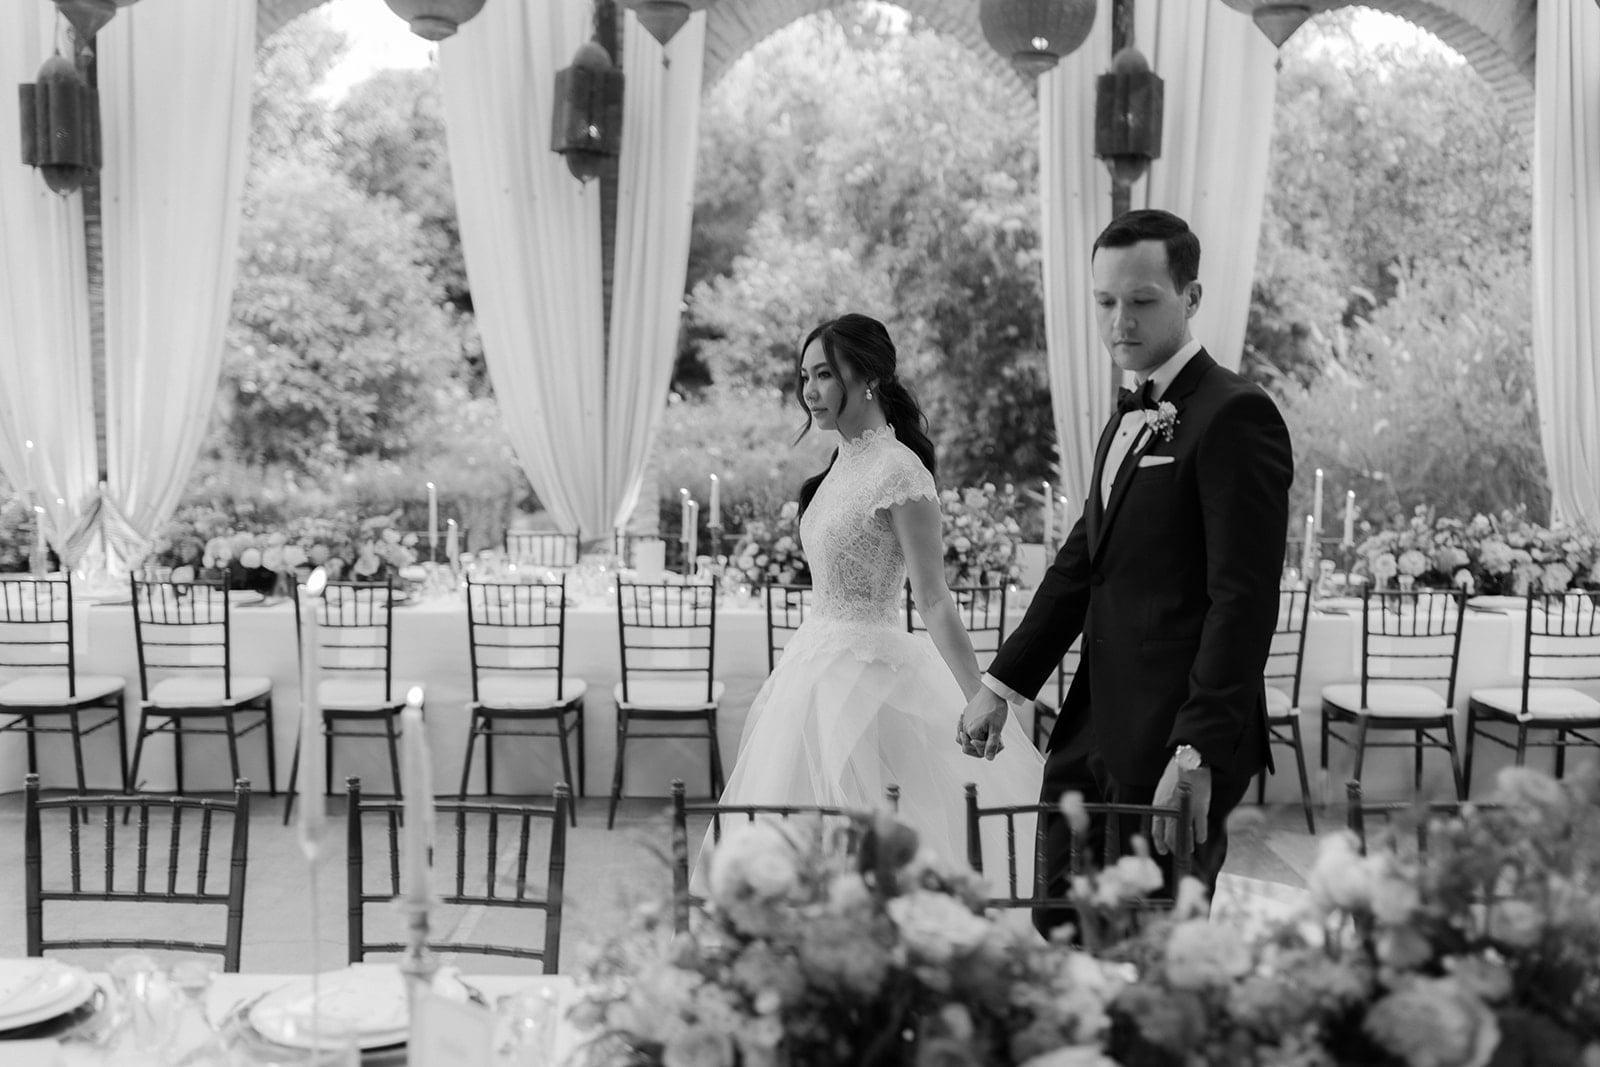 A couple at their luxury wedding in Marrakech styled by Marrakech wedding planners